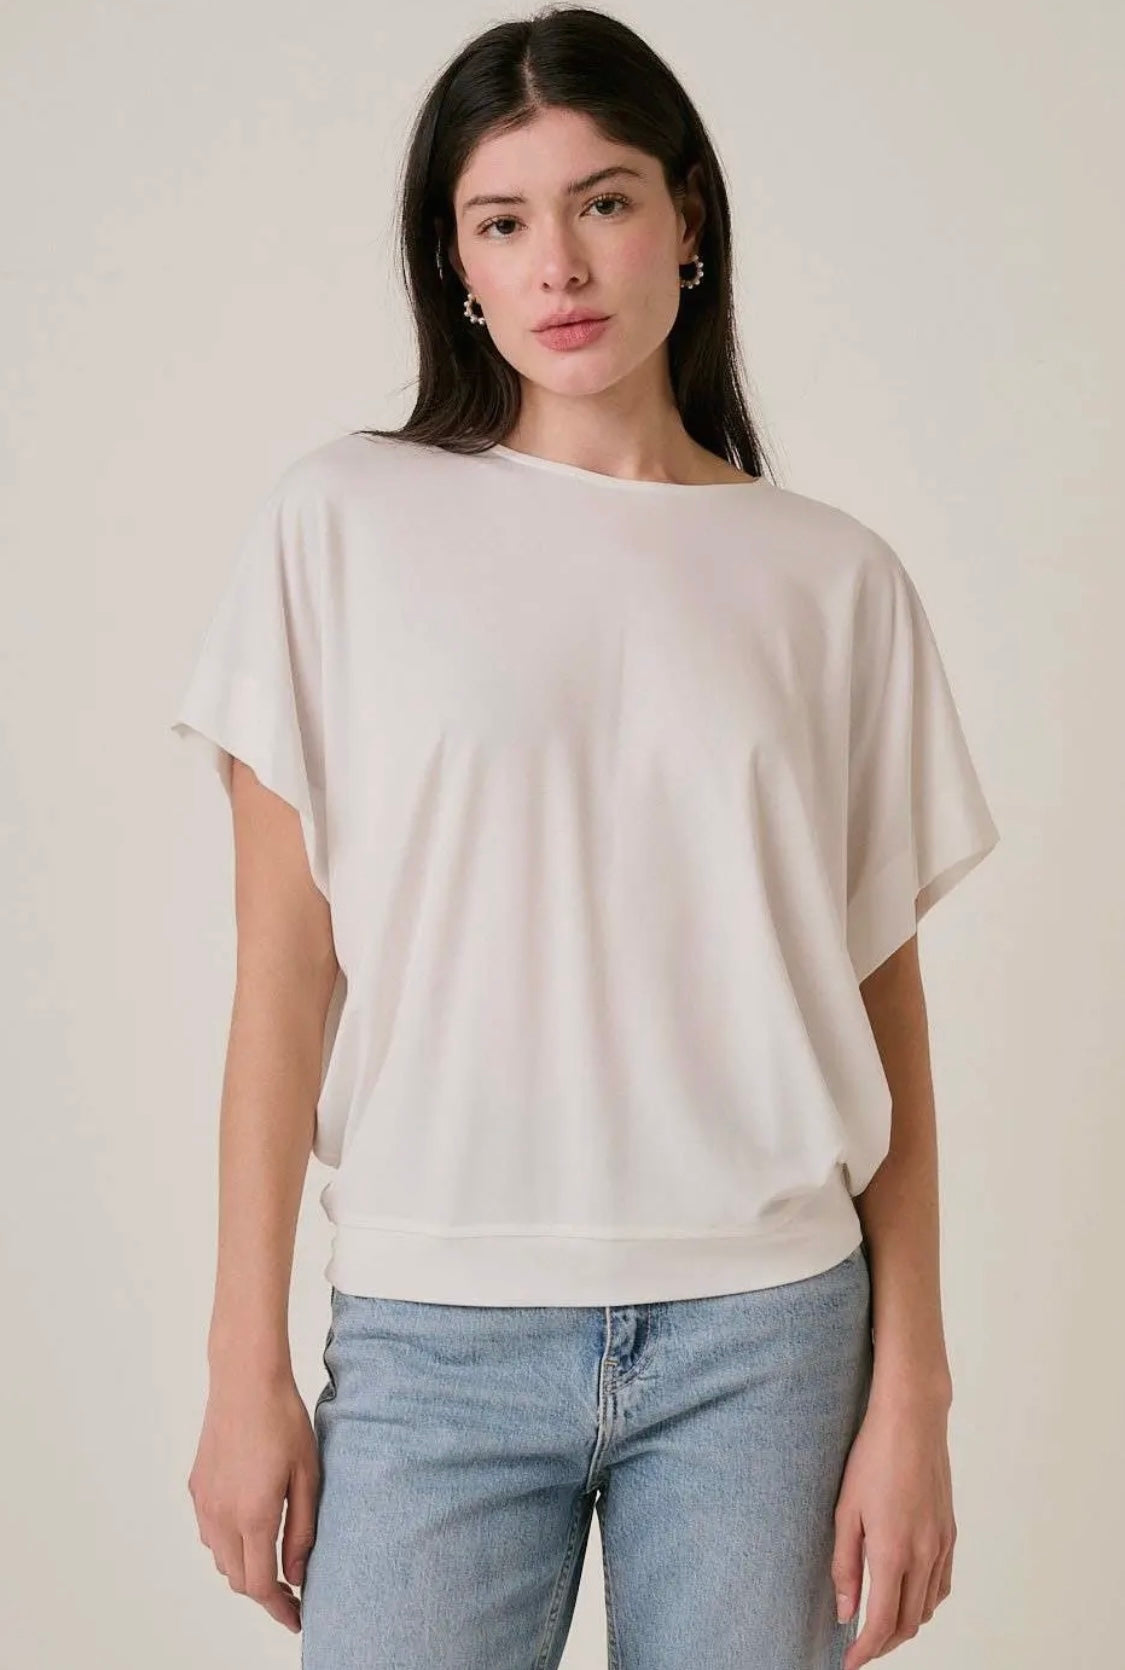 Casual Confidence Top